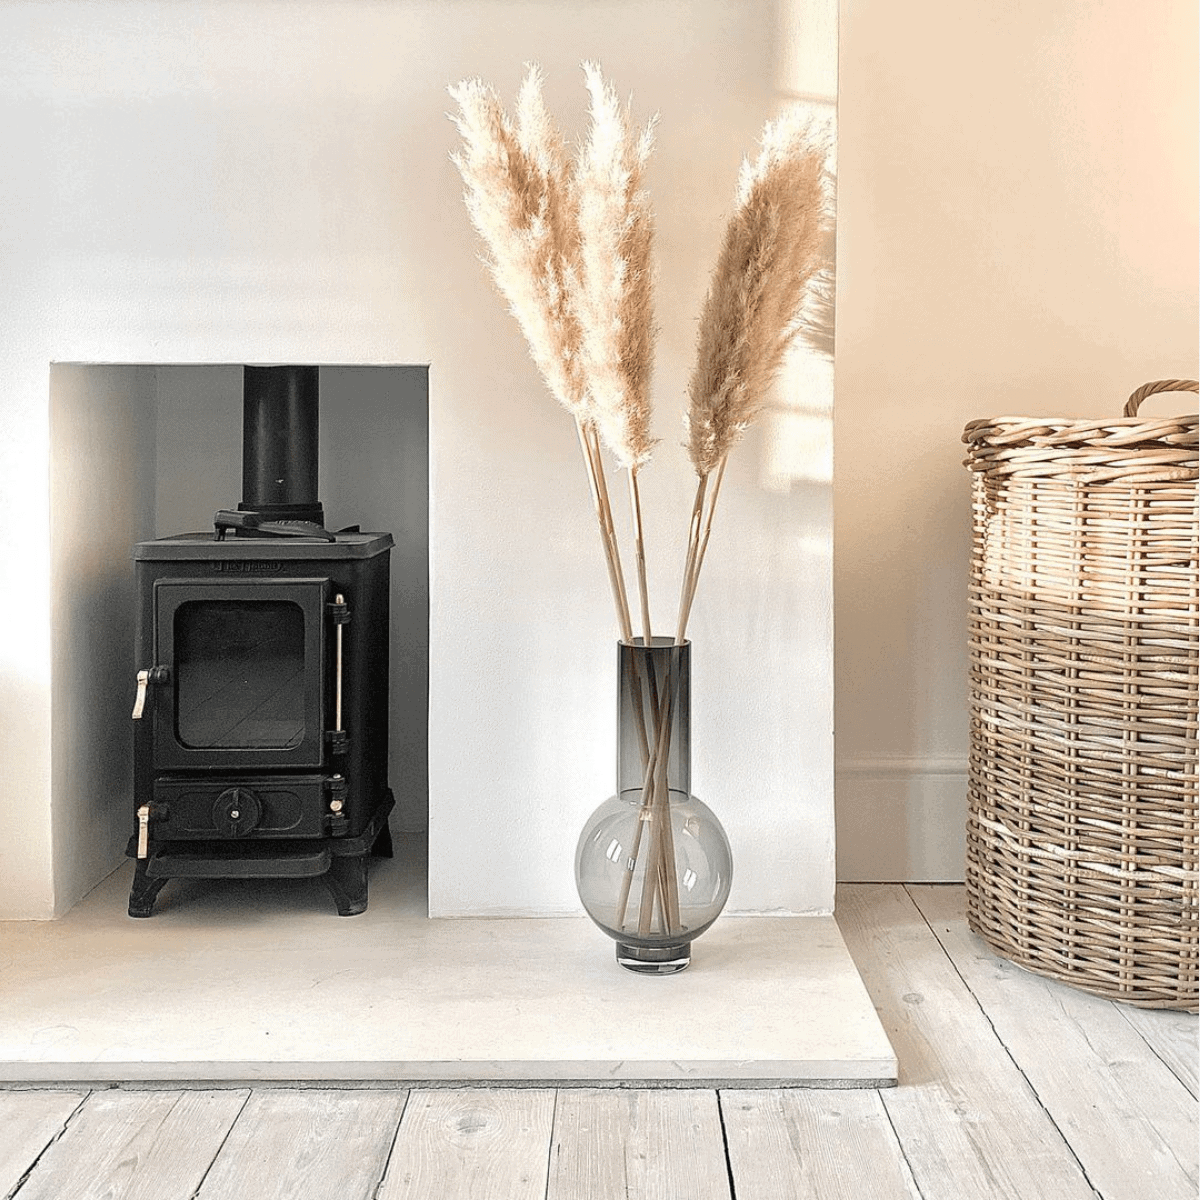 small wood burning stove installed in a small fireplace